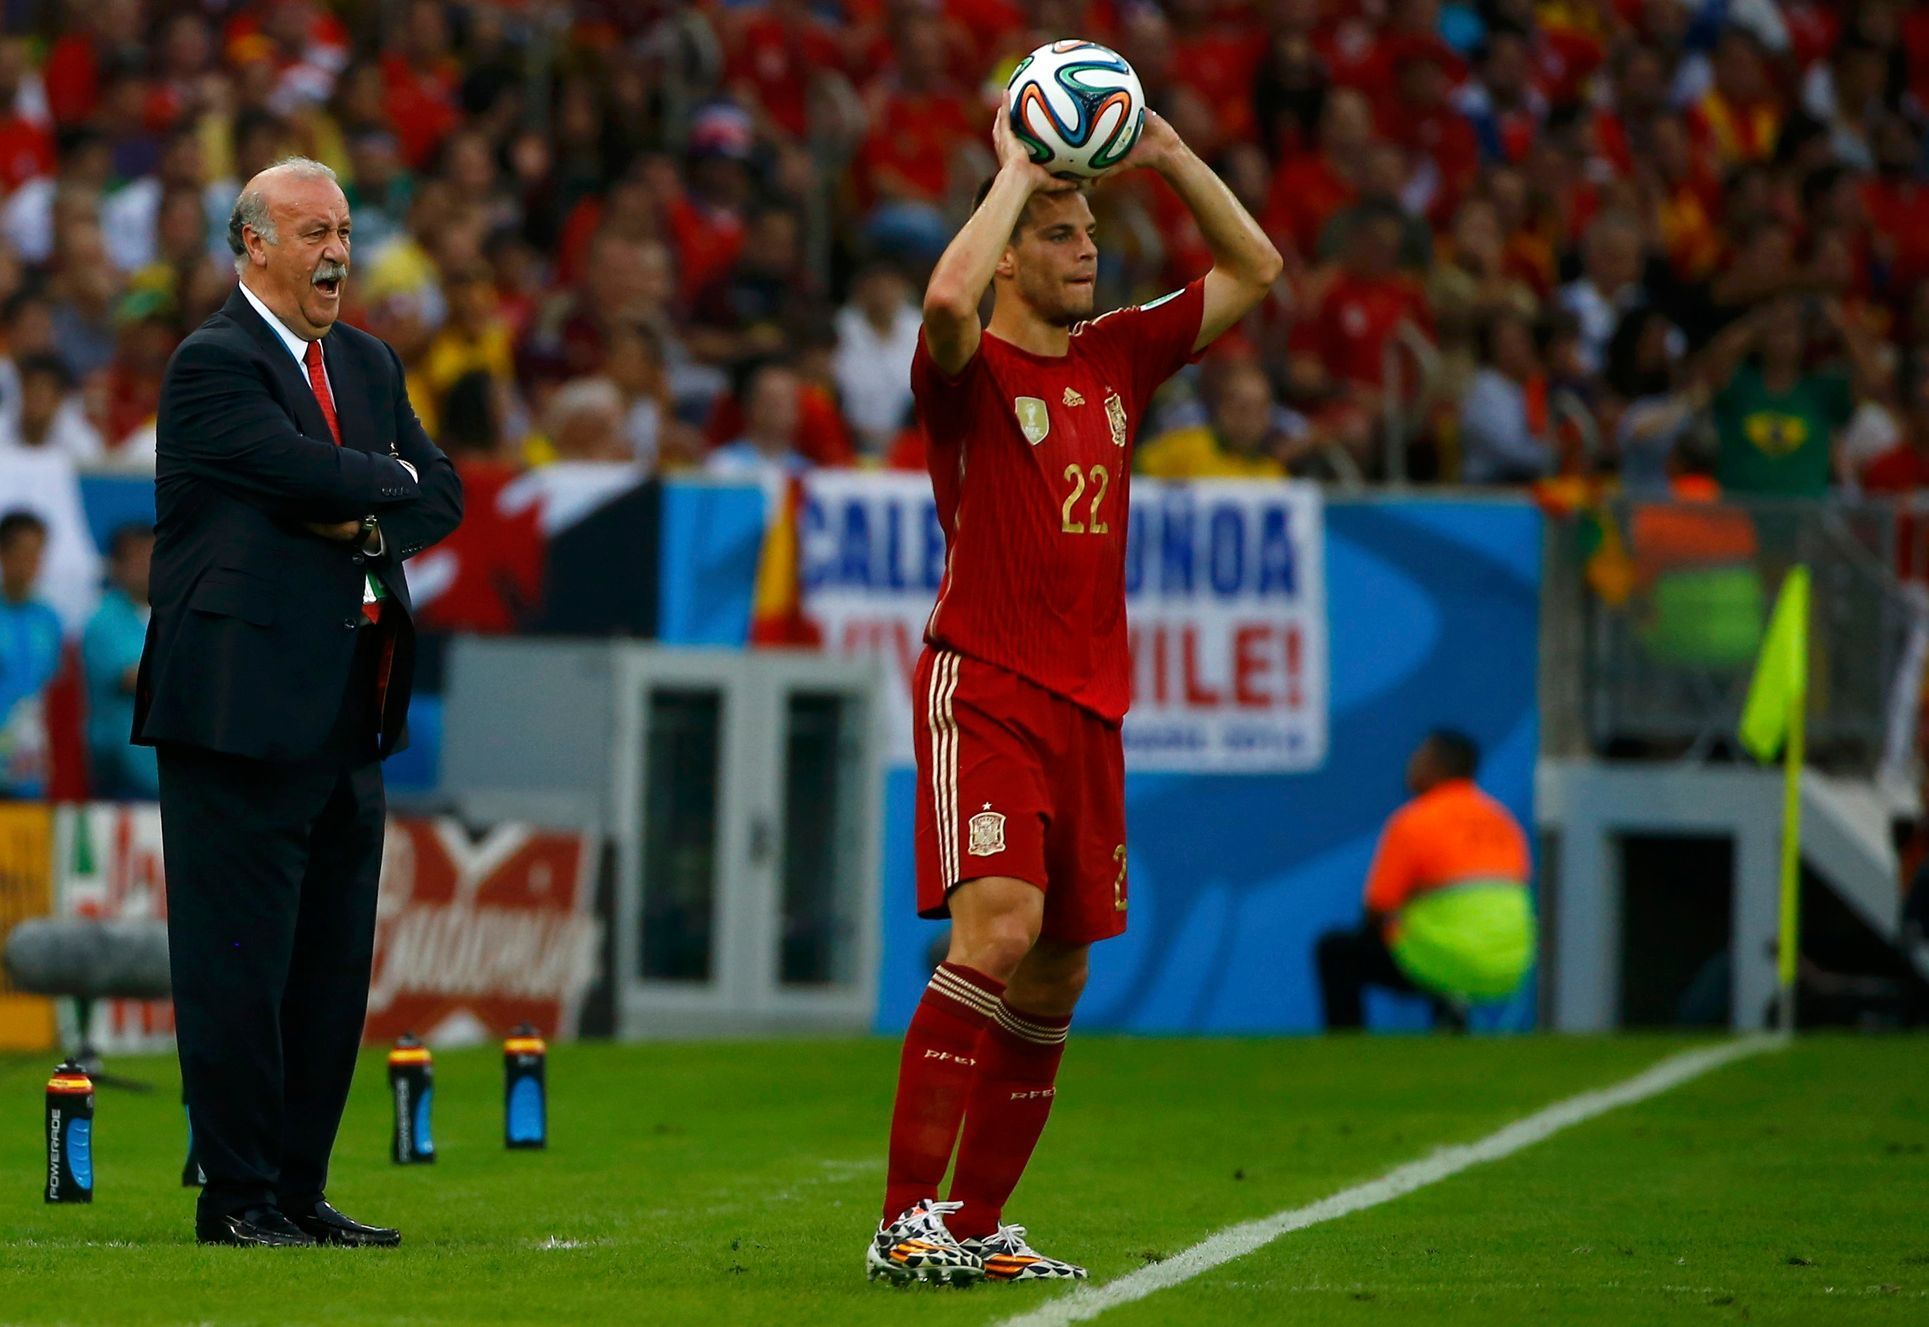 Spain's coach Del Bosque shouts instructions next to Azpilicueta during the team's 2014 World Cup Group B soccer match against Chile in Rio de Janeiro